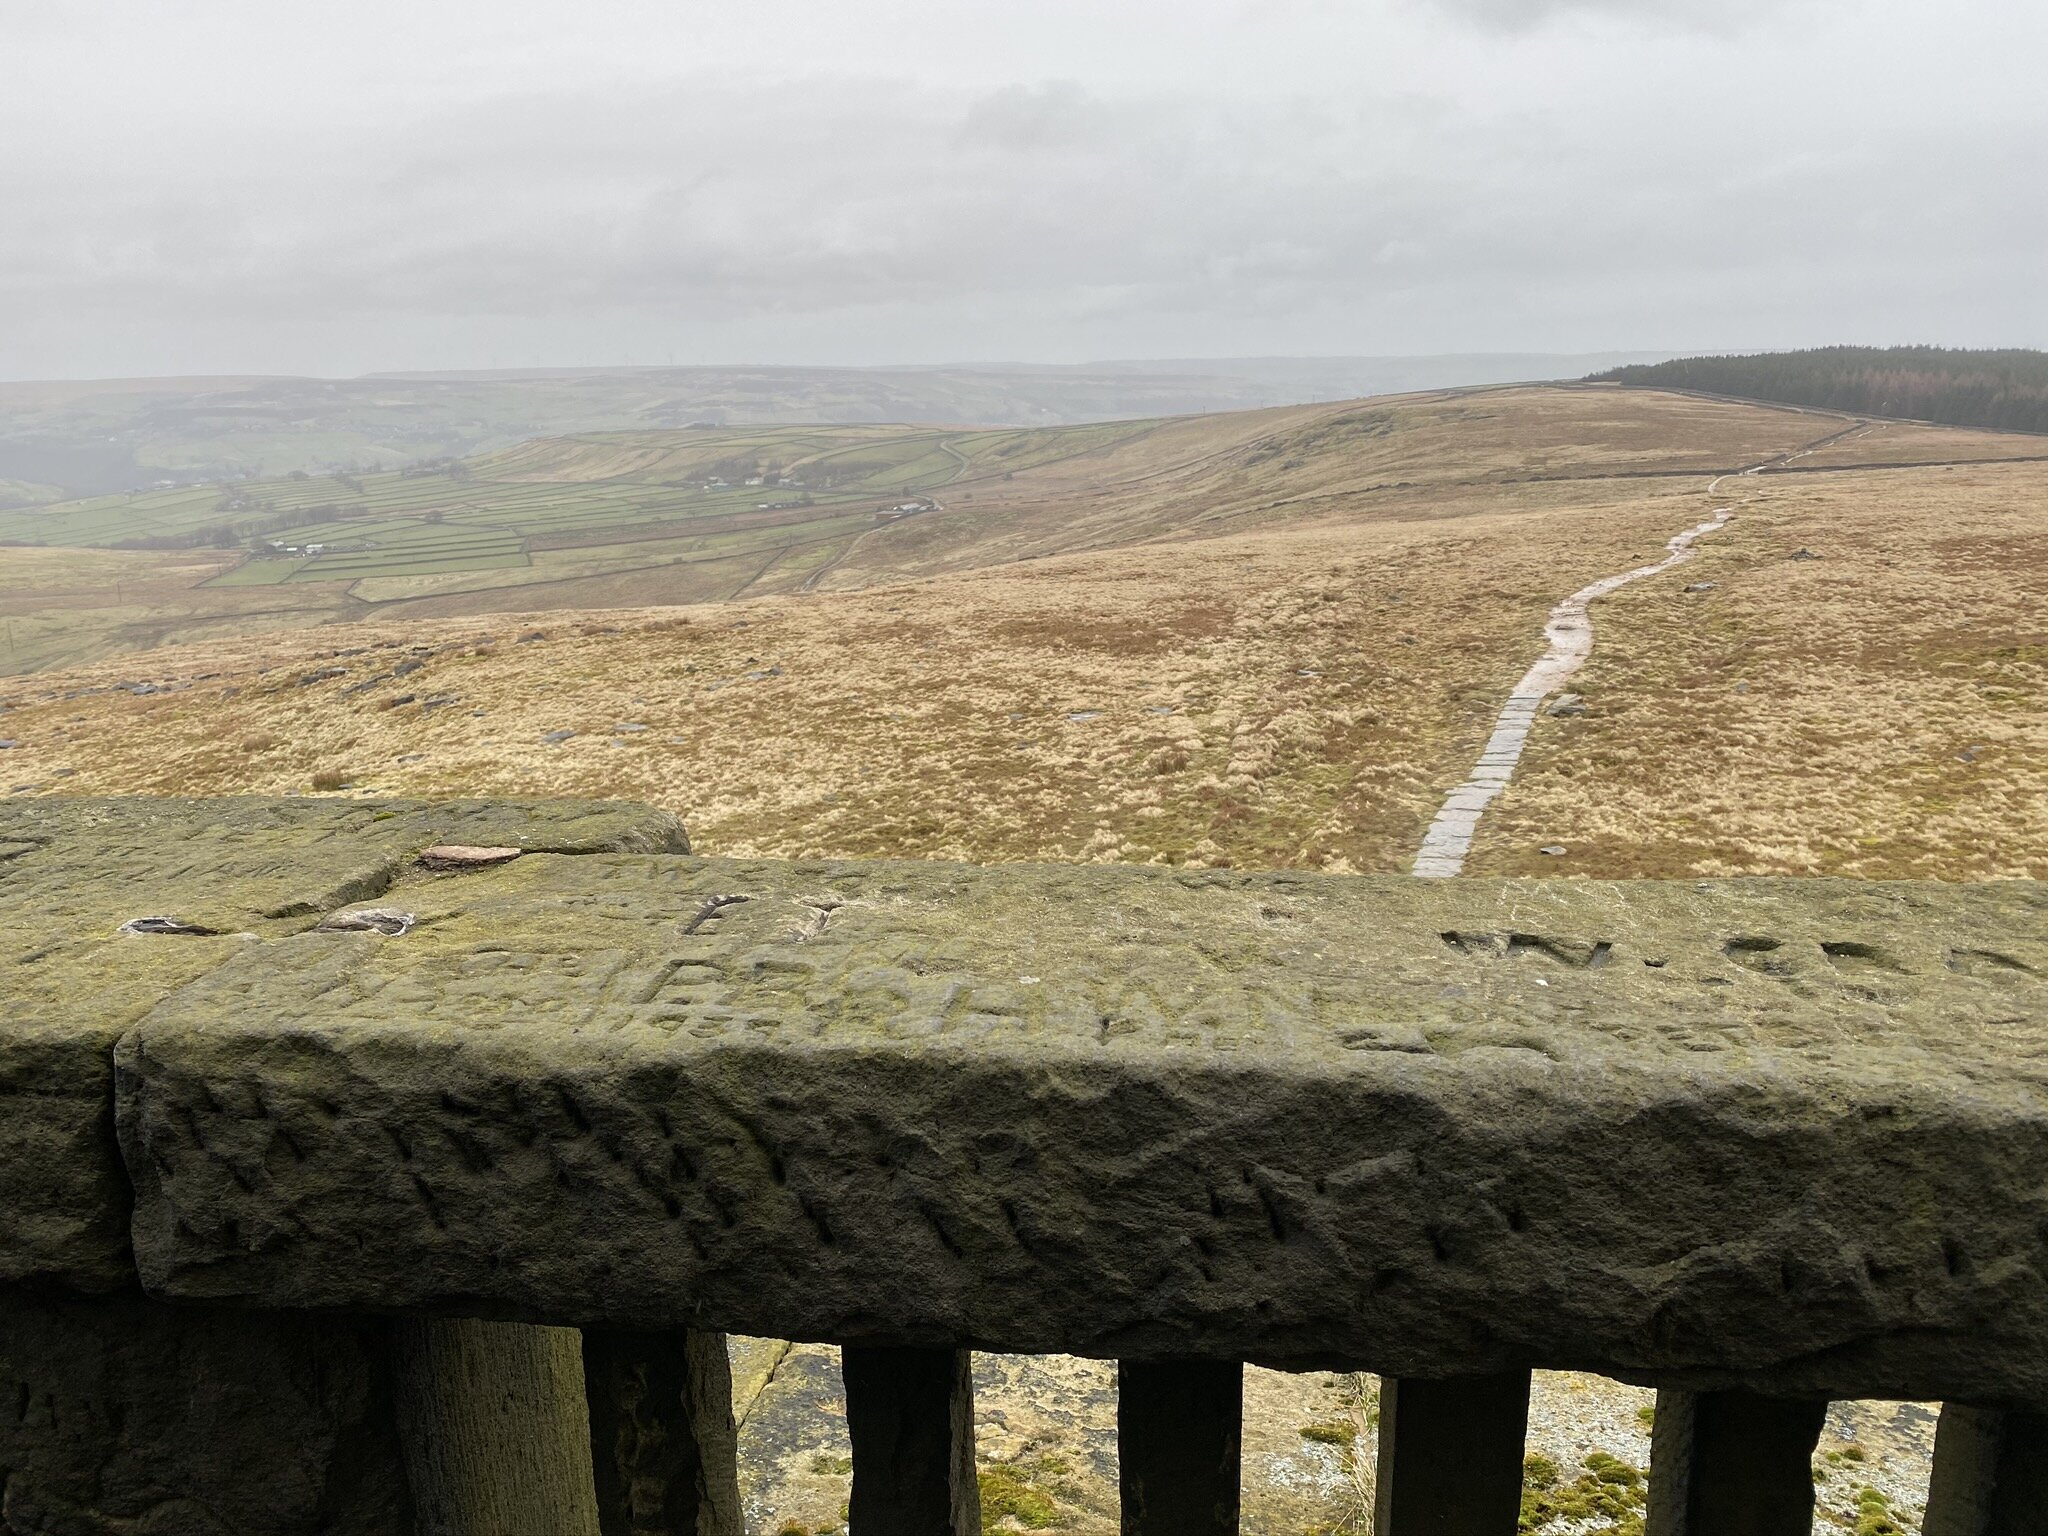 Stoodley Pike monument